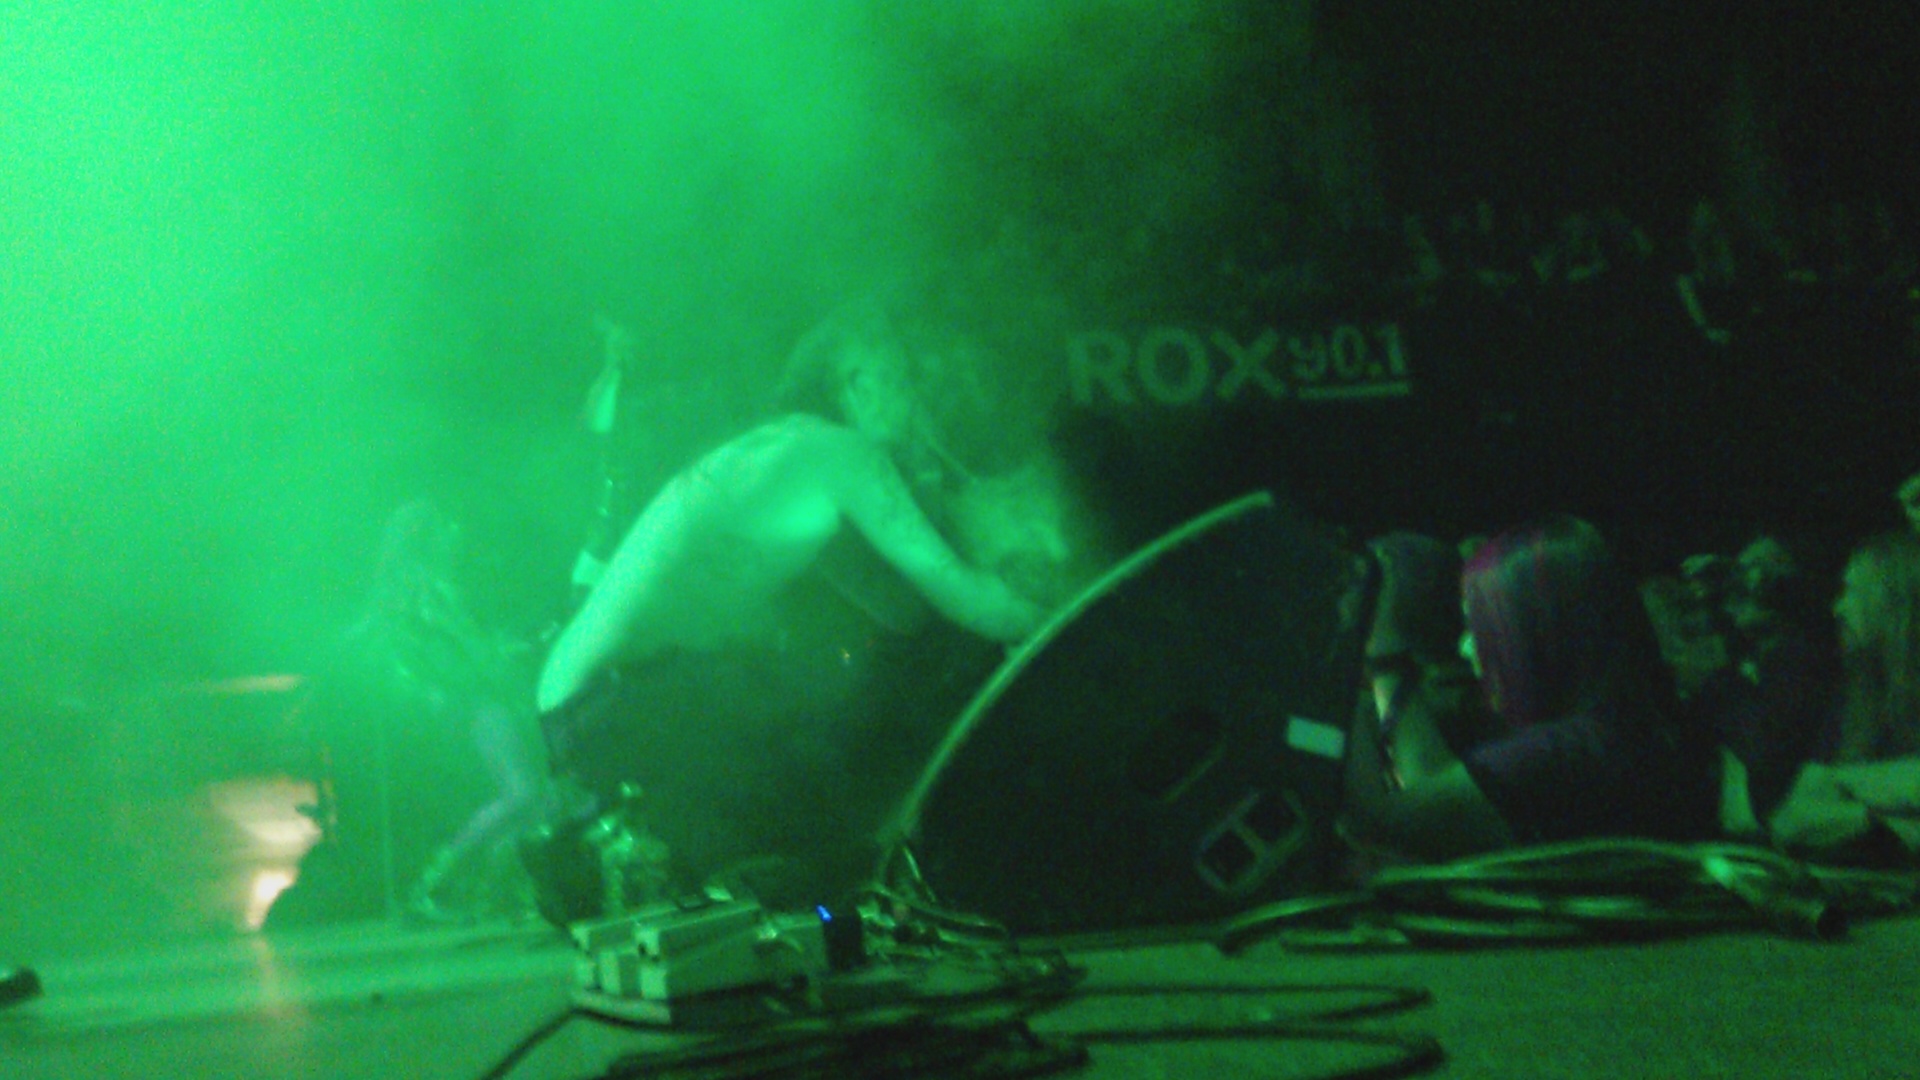 a person in a band doing soing under a green light